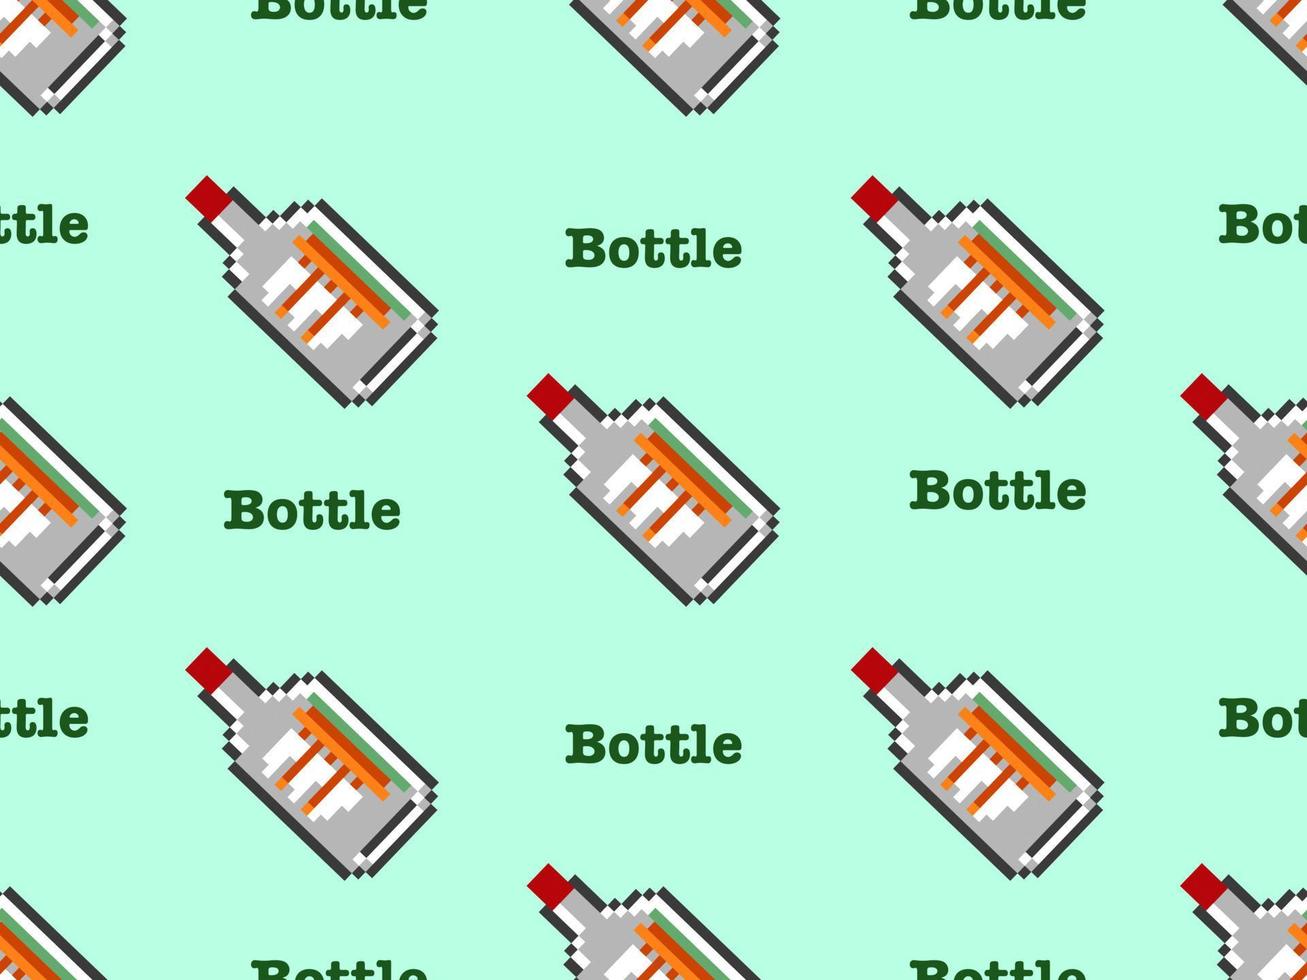 Bottle cartoon character seamless pattern on green background.Pixel style vector